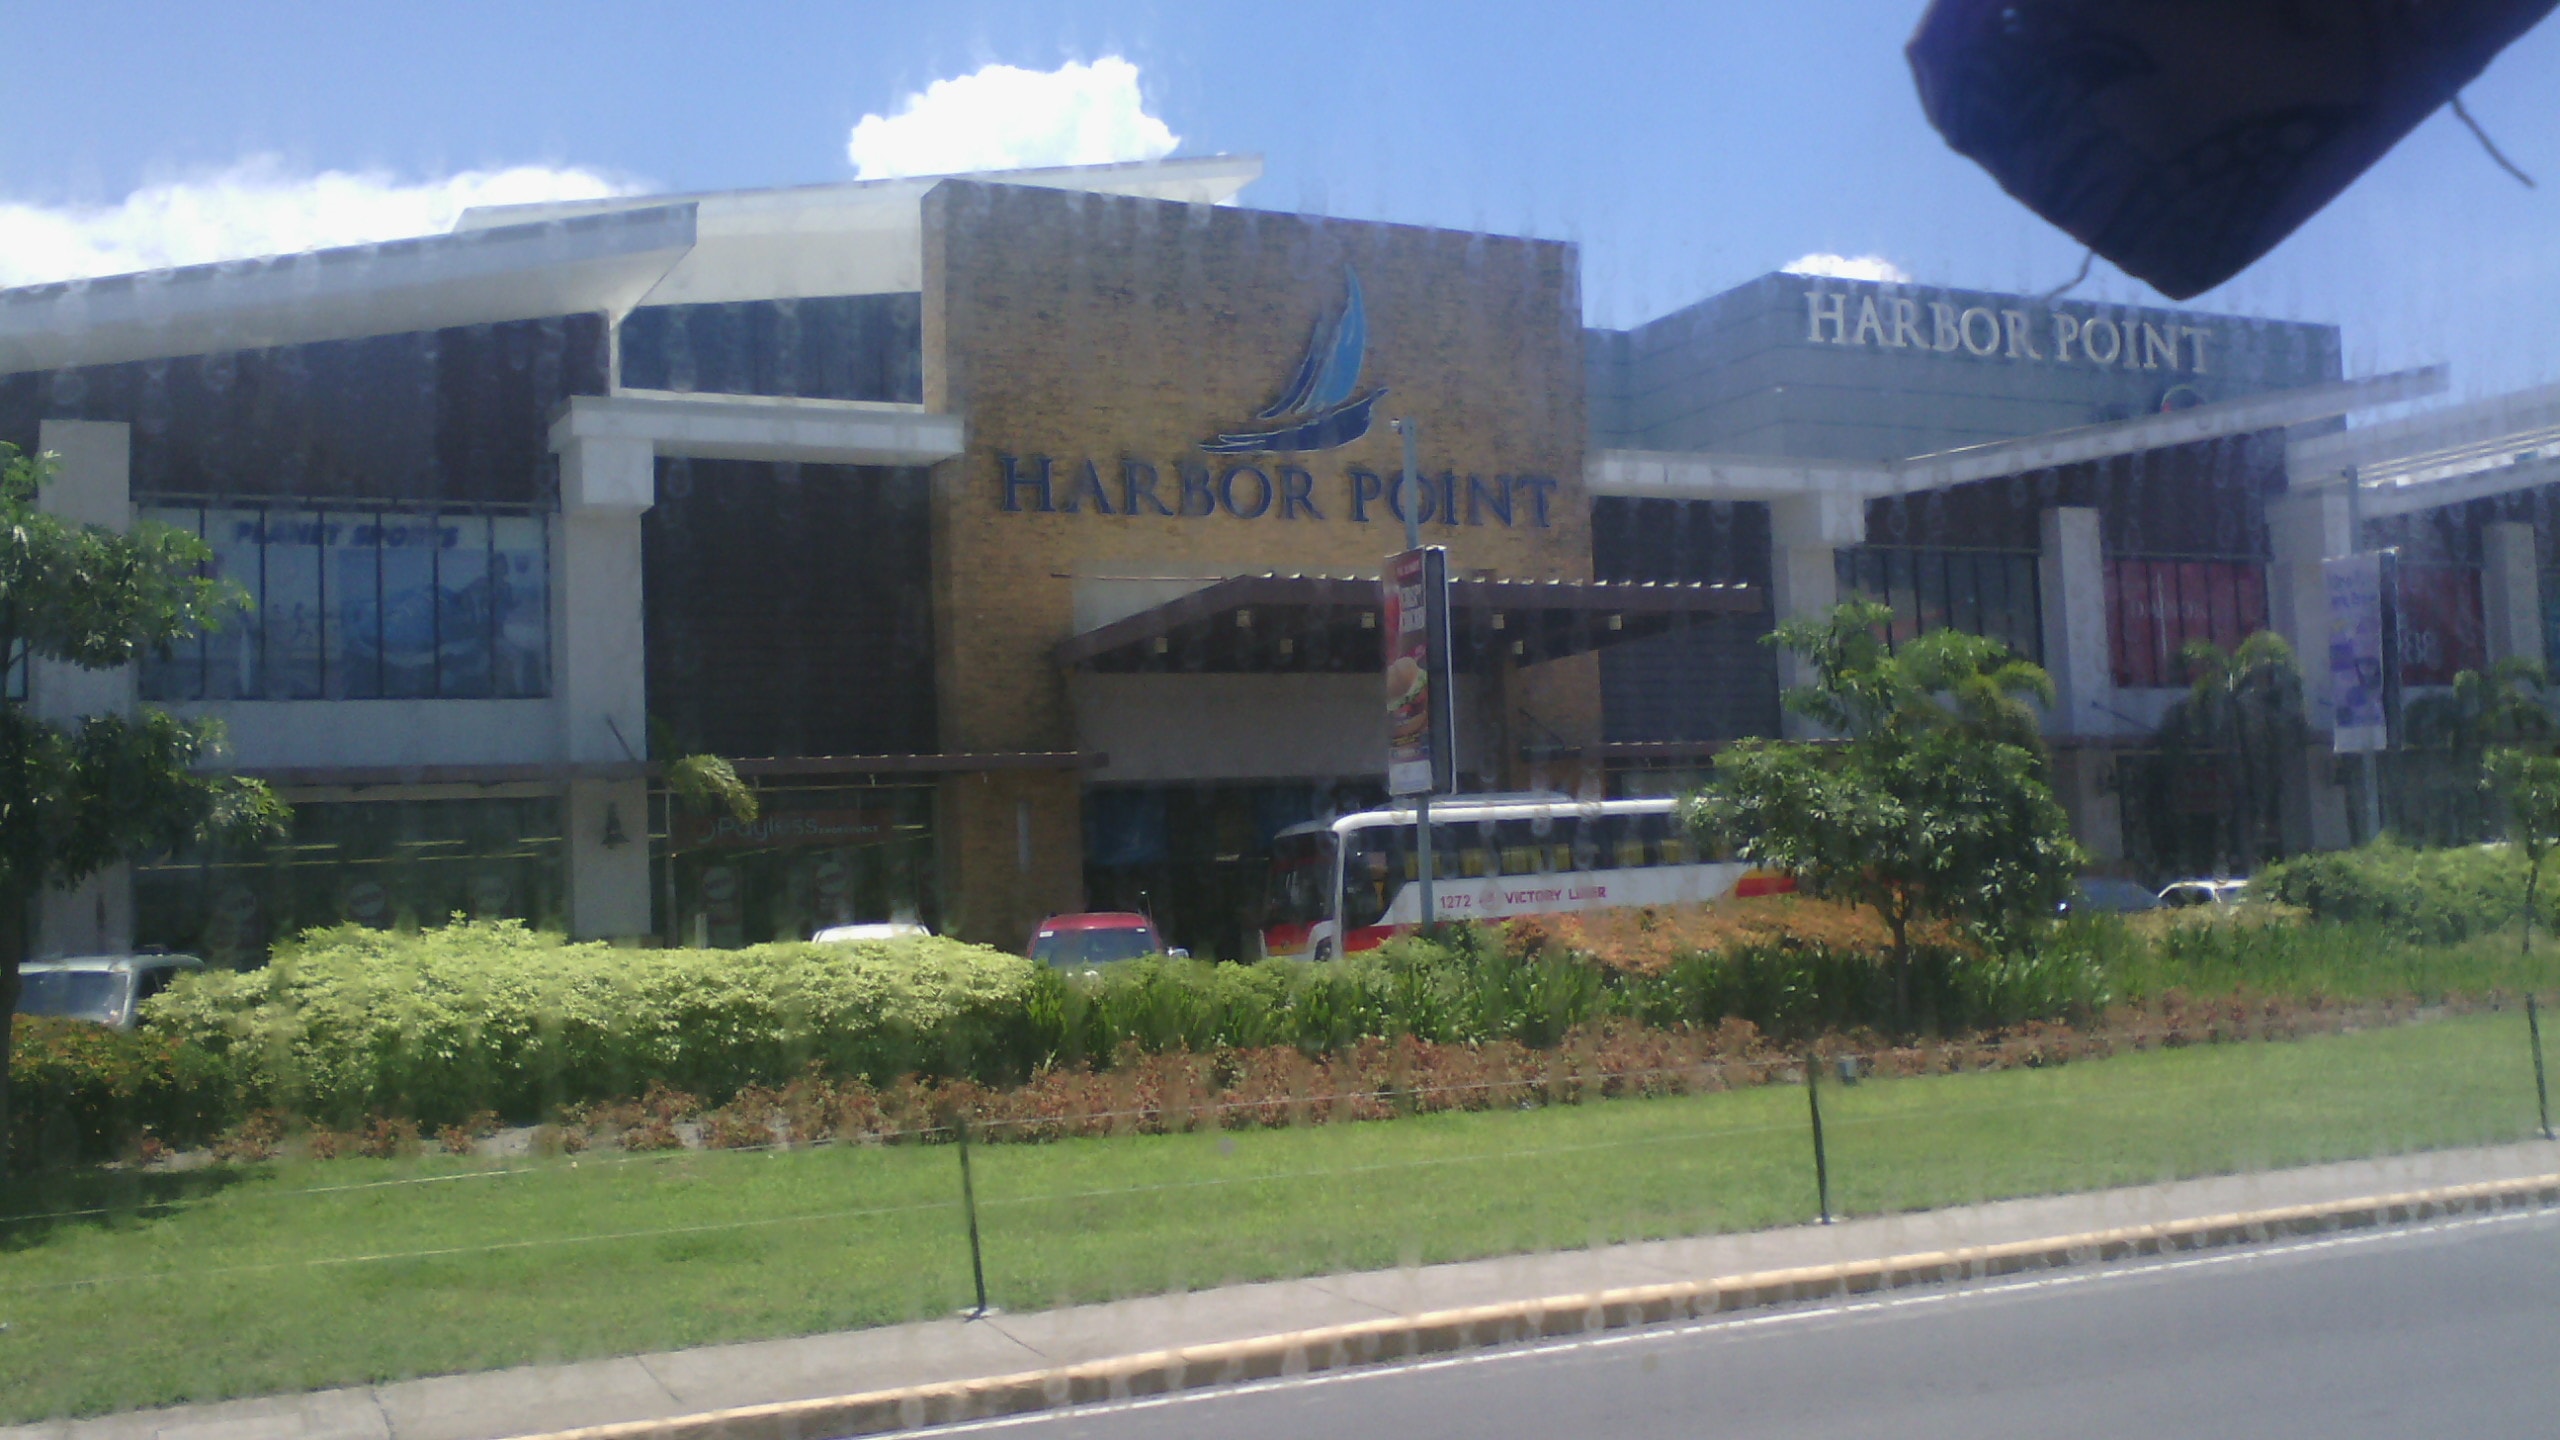 harbor point mall in subic bay freeport zone